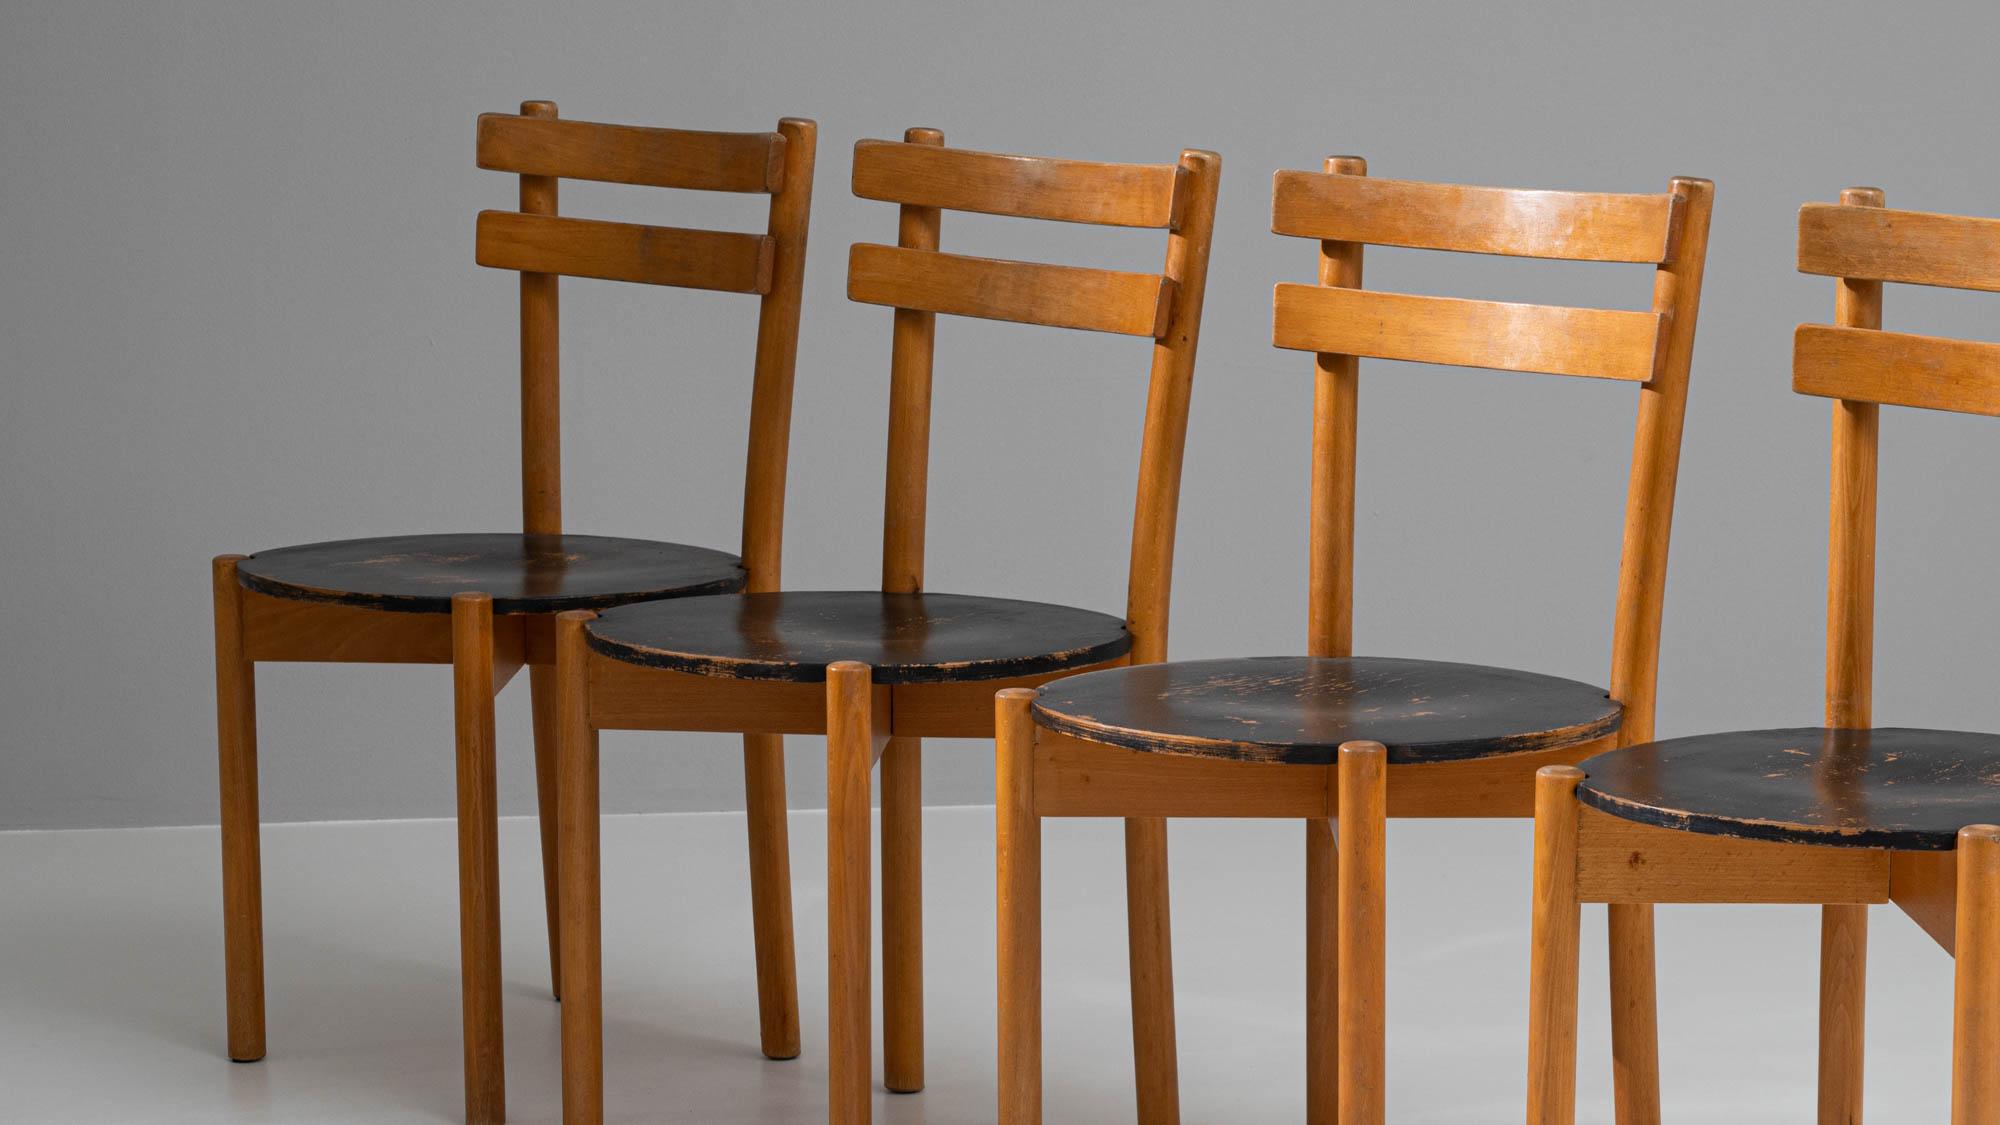 20th Century German EKA Wohnmöbel Wooden Dining Chairs, Set of 4 For Sale 7